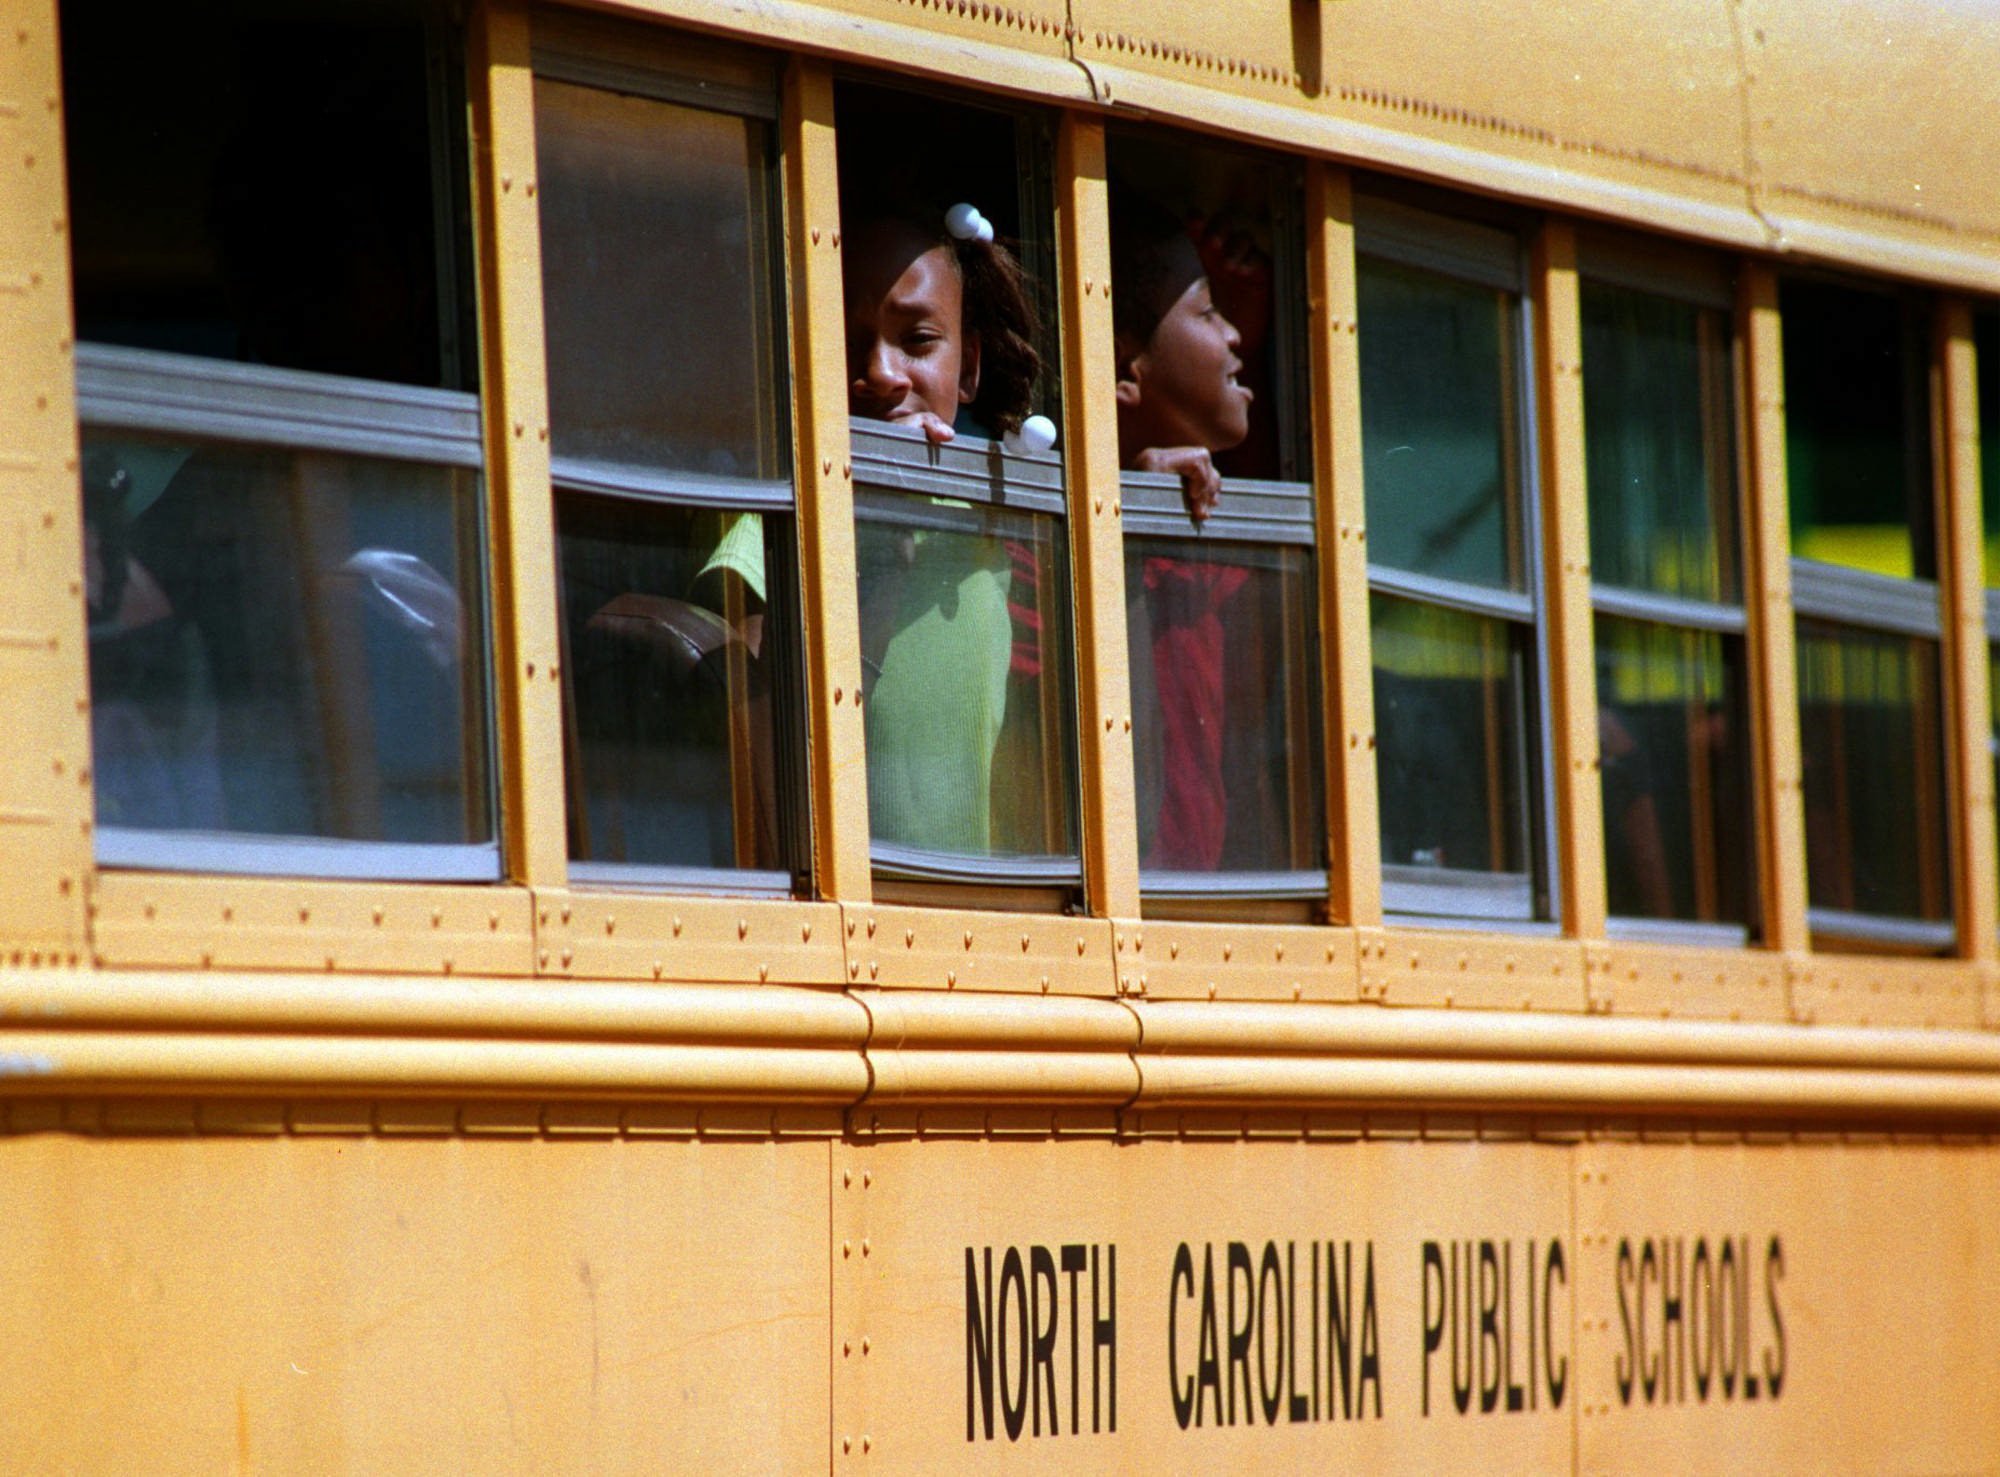 Schoolchildren in Huntersville, N.C., a suburb of Charlotte, in 1999. Two years later, a court order ended a comprehensive desegregration plan in the Charlotte school district that included busing. (Todd Sumlin/The Charlotte Observer)